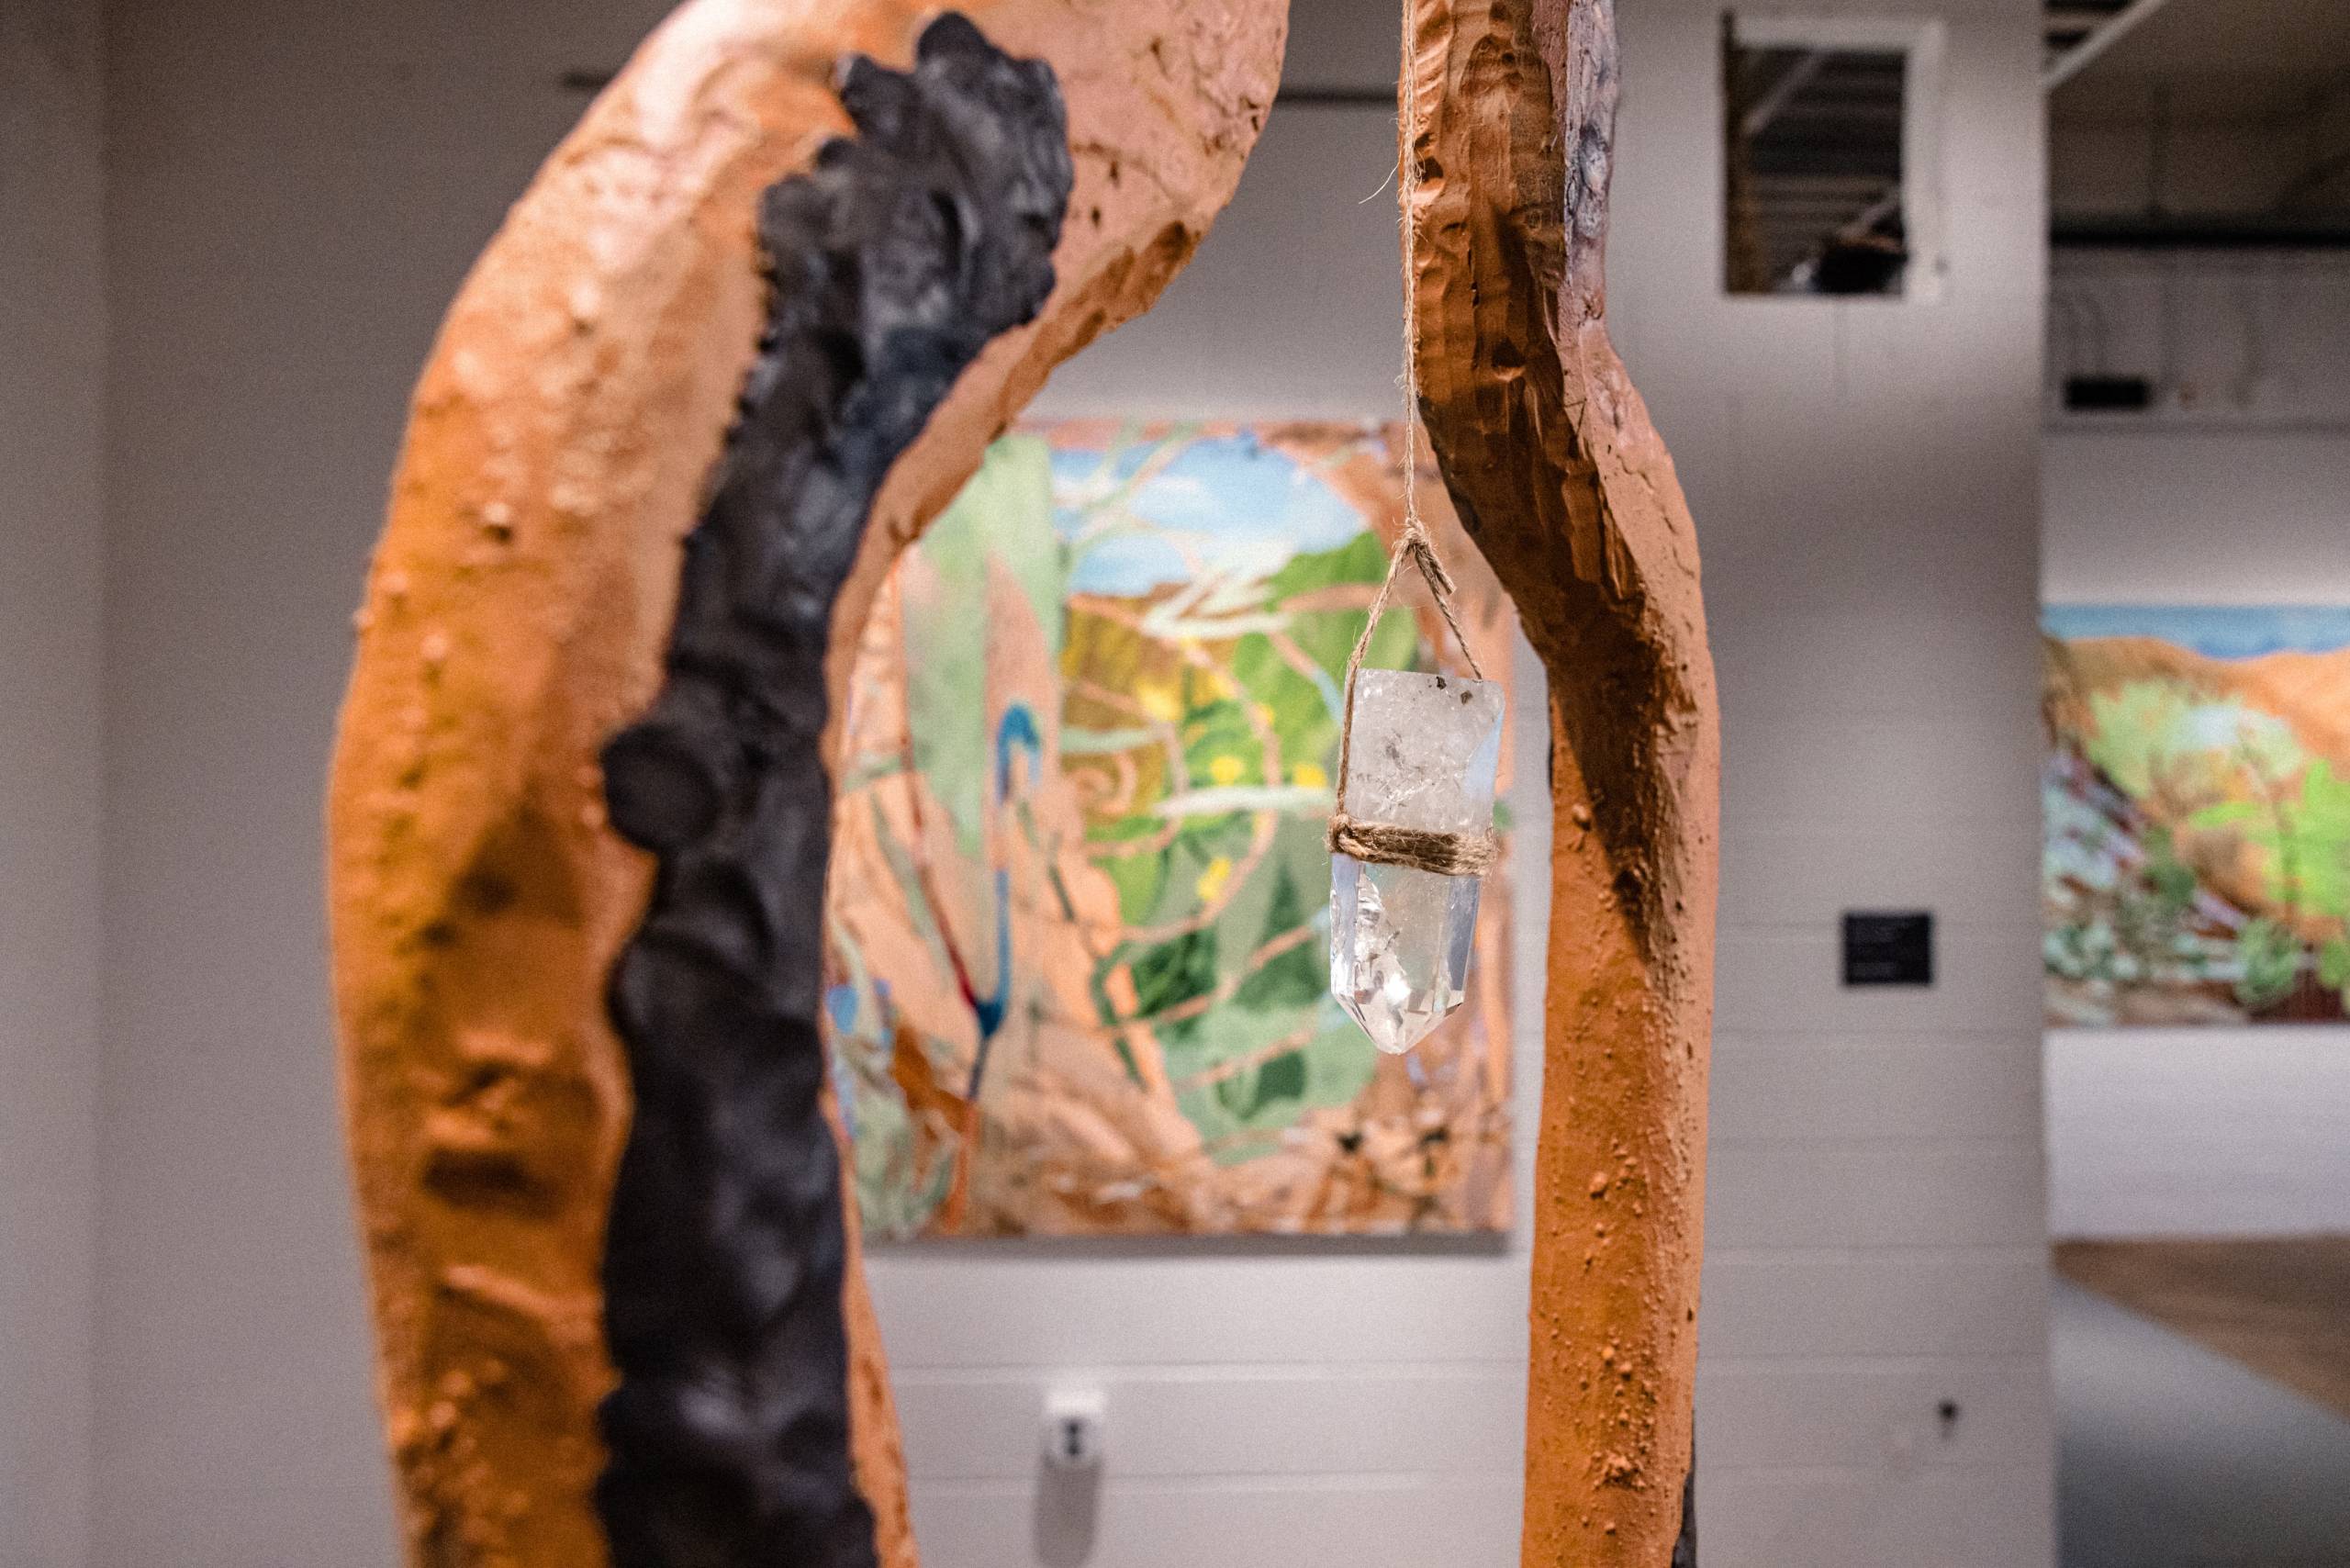 A crystal hangs from a rope inside an orange and black sculpture that frames an abstract painting in the background with browns, oranges, greens, blues, and yellows.